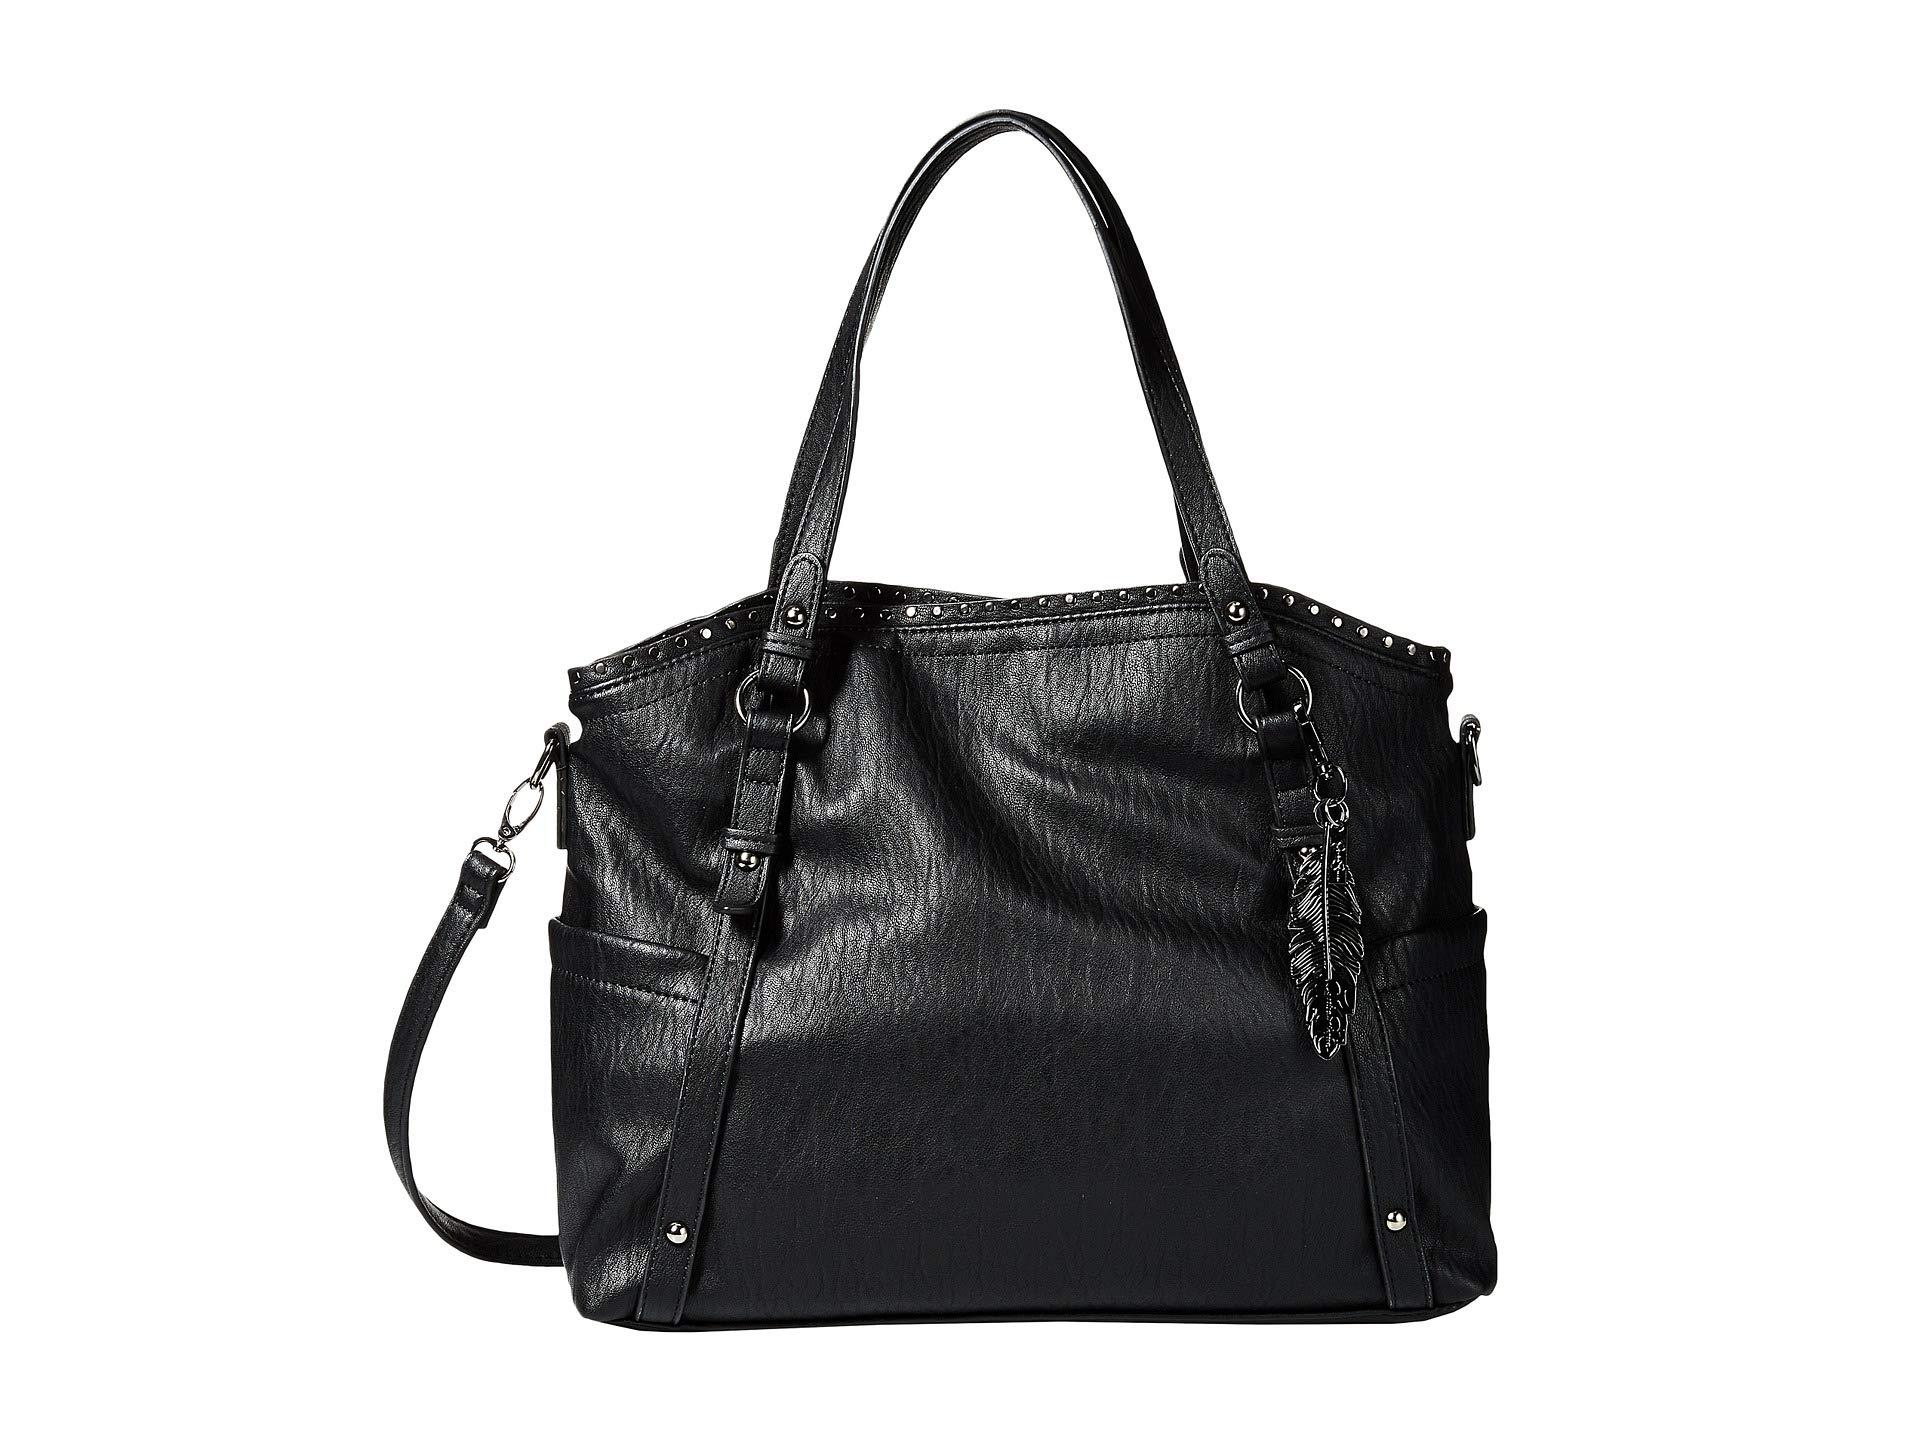 Jessica Simpson Synthetic Misha East/west Crossbody Tote in Black - Lyst